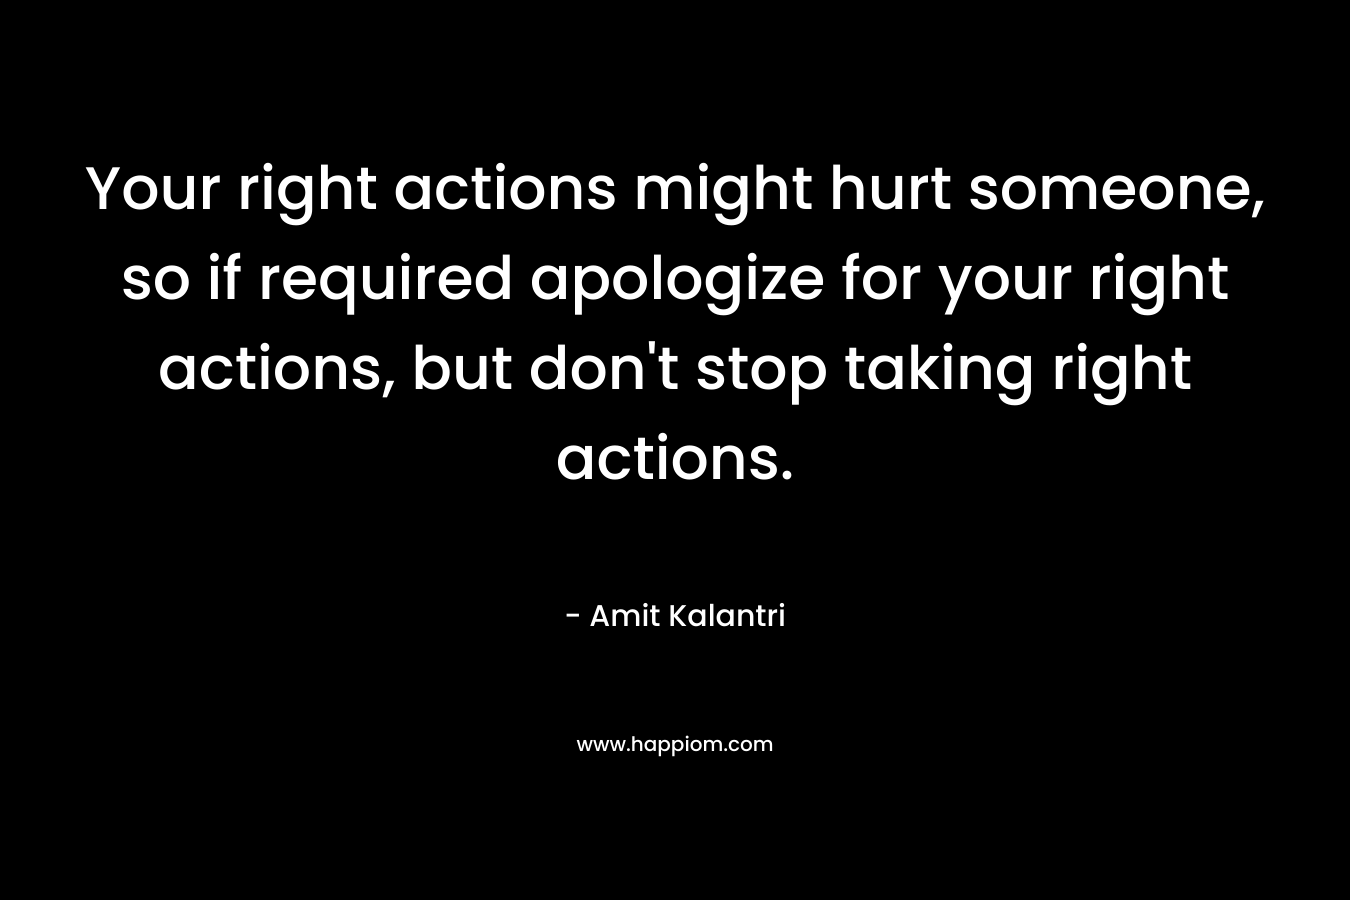 Your right actions might hurt someone, so if required apologize for your right actions, but don't stop taking right actions.